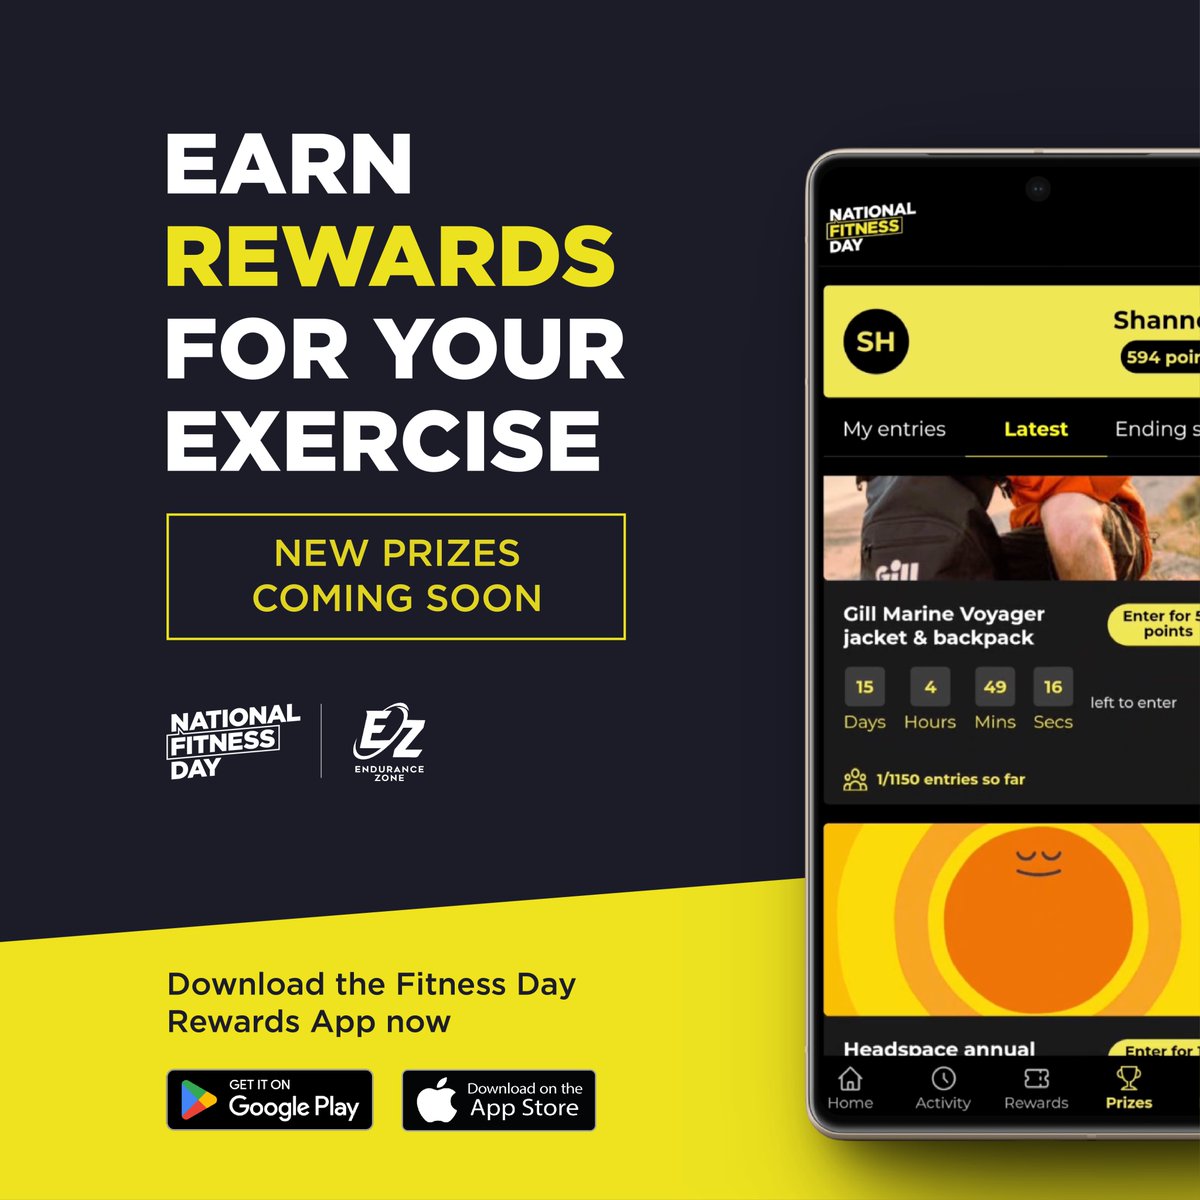 There are just over 5 weeks left of 2023, so now is the perfect time to start on your health and fitness! The Fitness Day Rewards app is the perfect motivator, rewarding you for being active, with new exclusive prizes coming soon. Download the app now 👇 endurancezone.com/national-fitne…